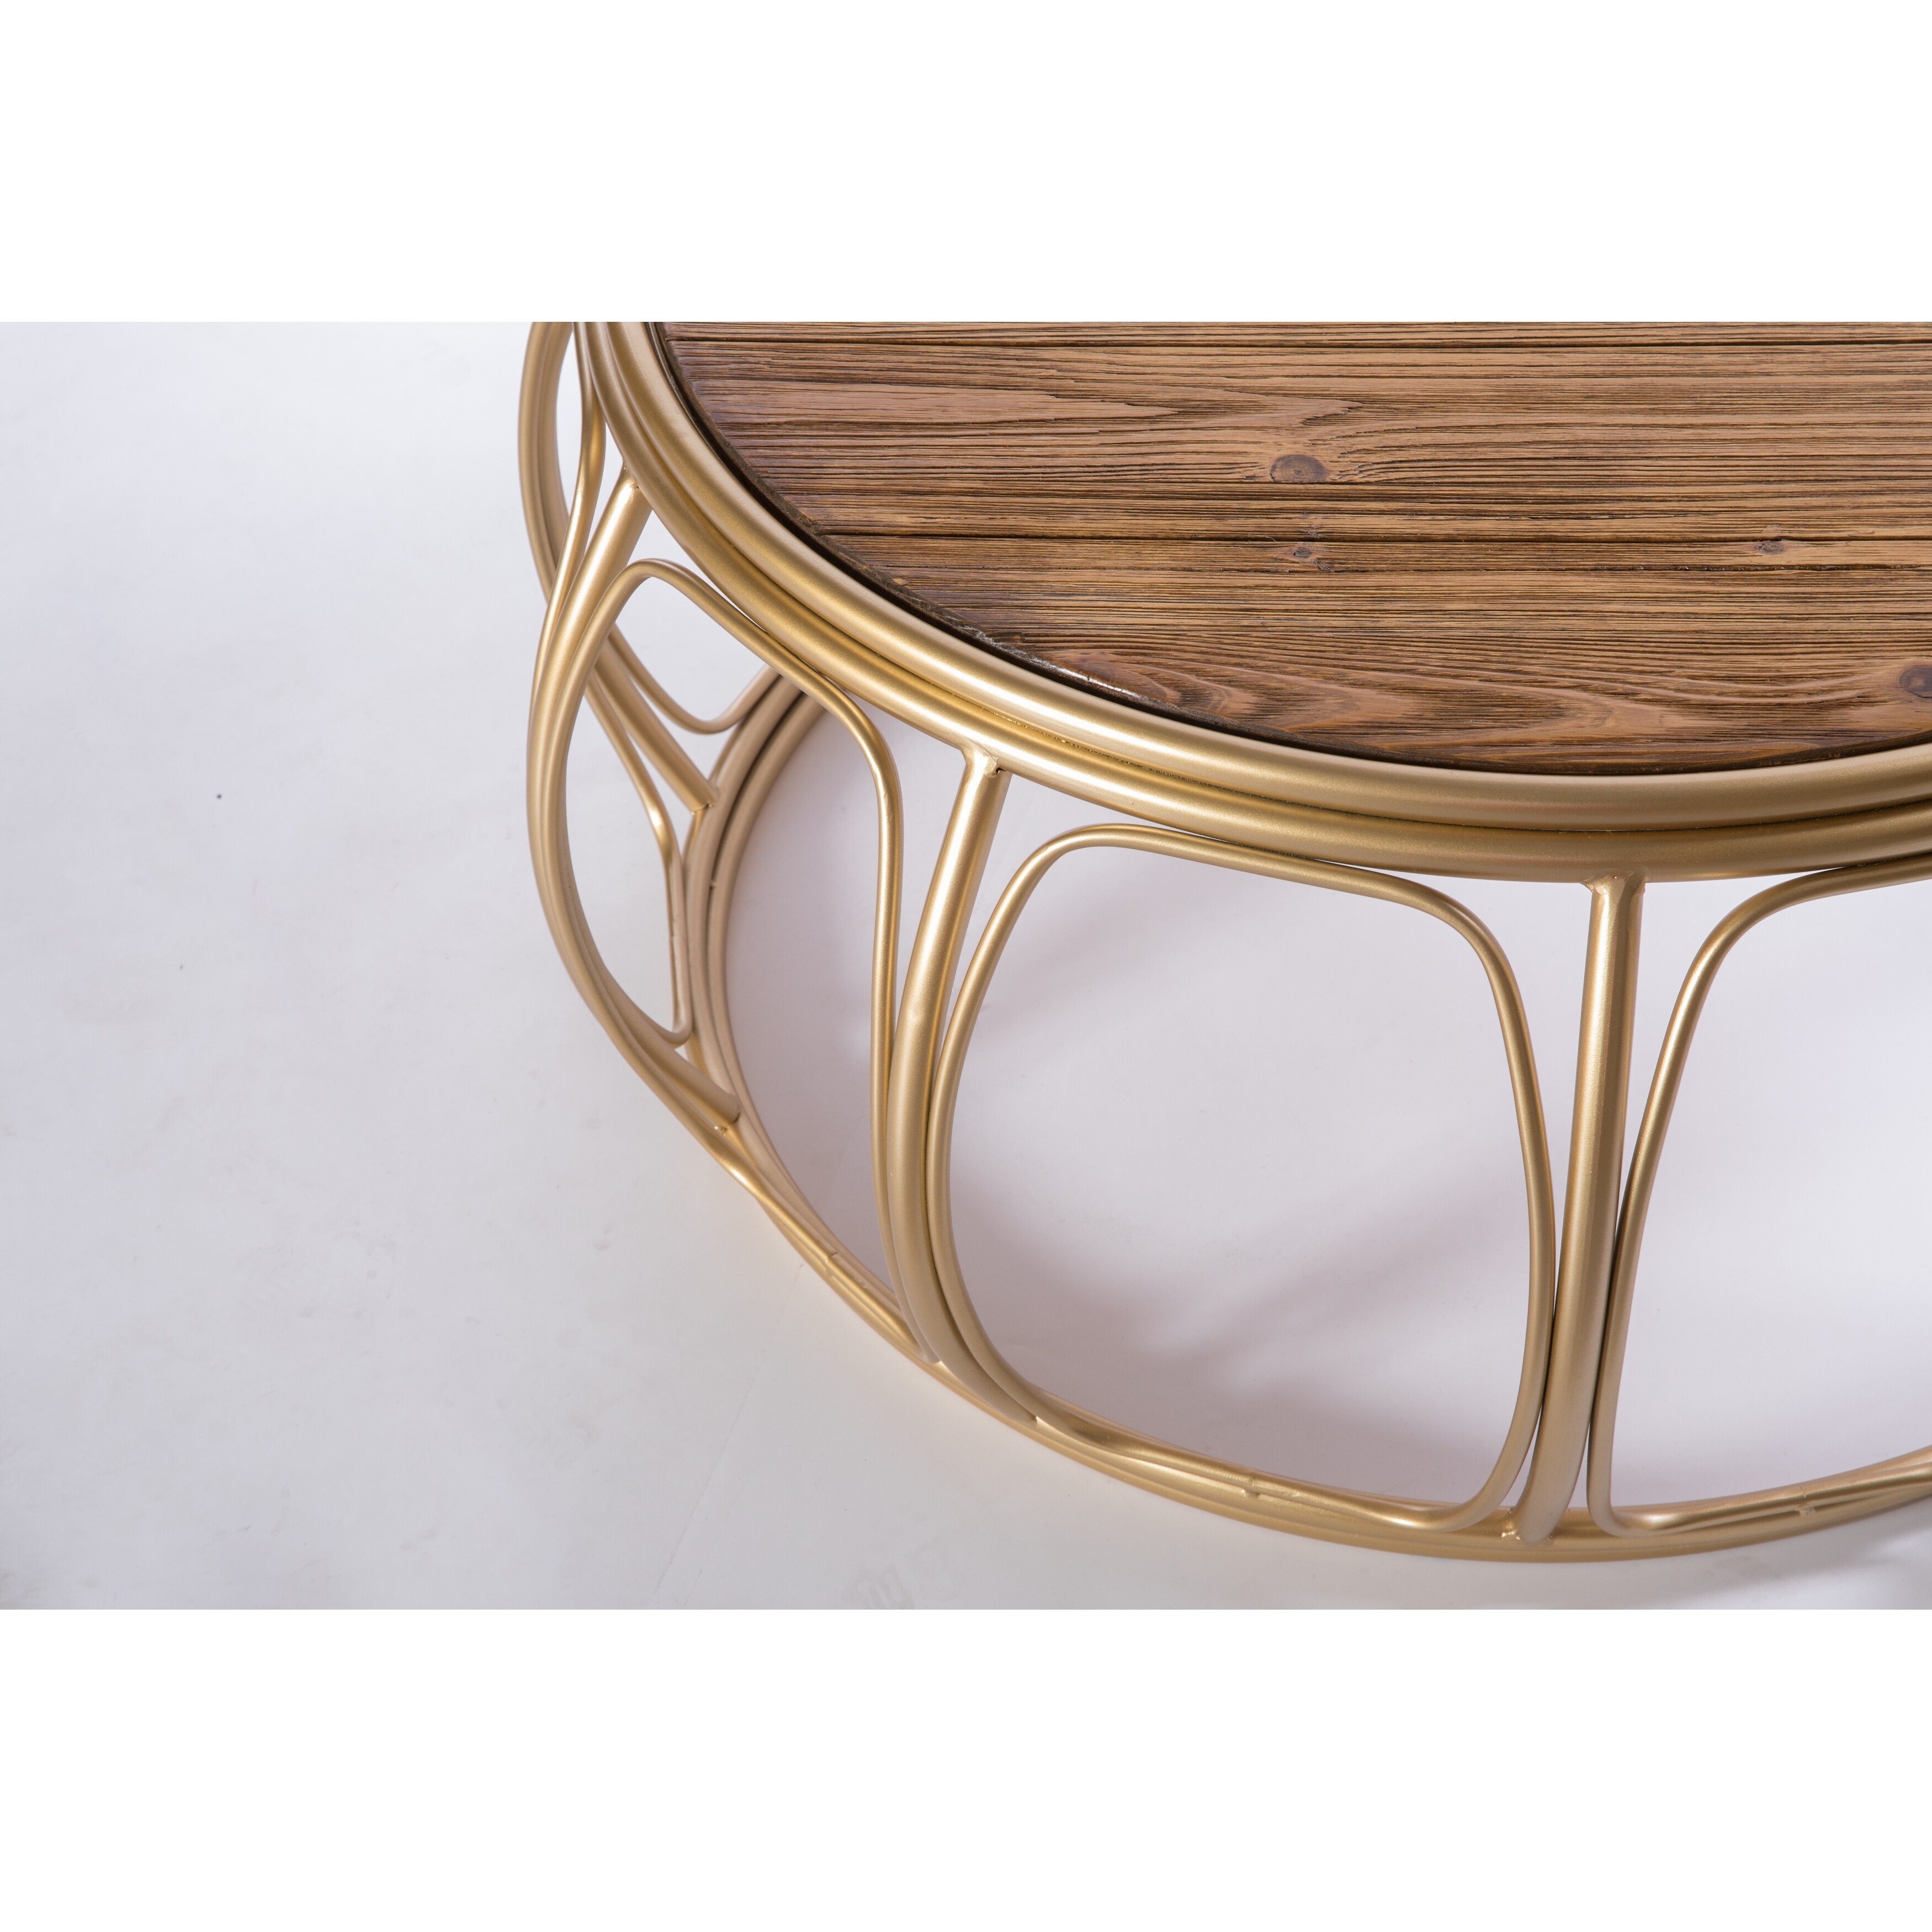 Floriston Smoked Glass And Brass Brushed Large Round Coffee Table Cfs Furniture Uk